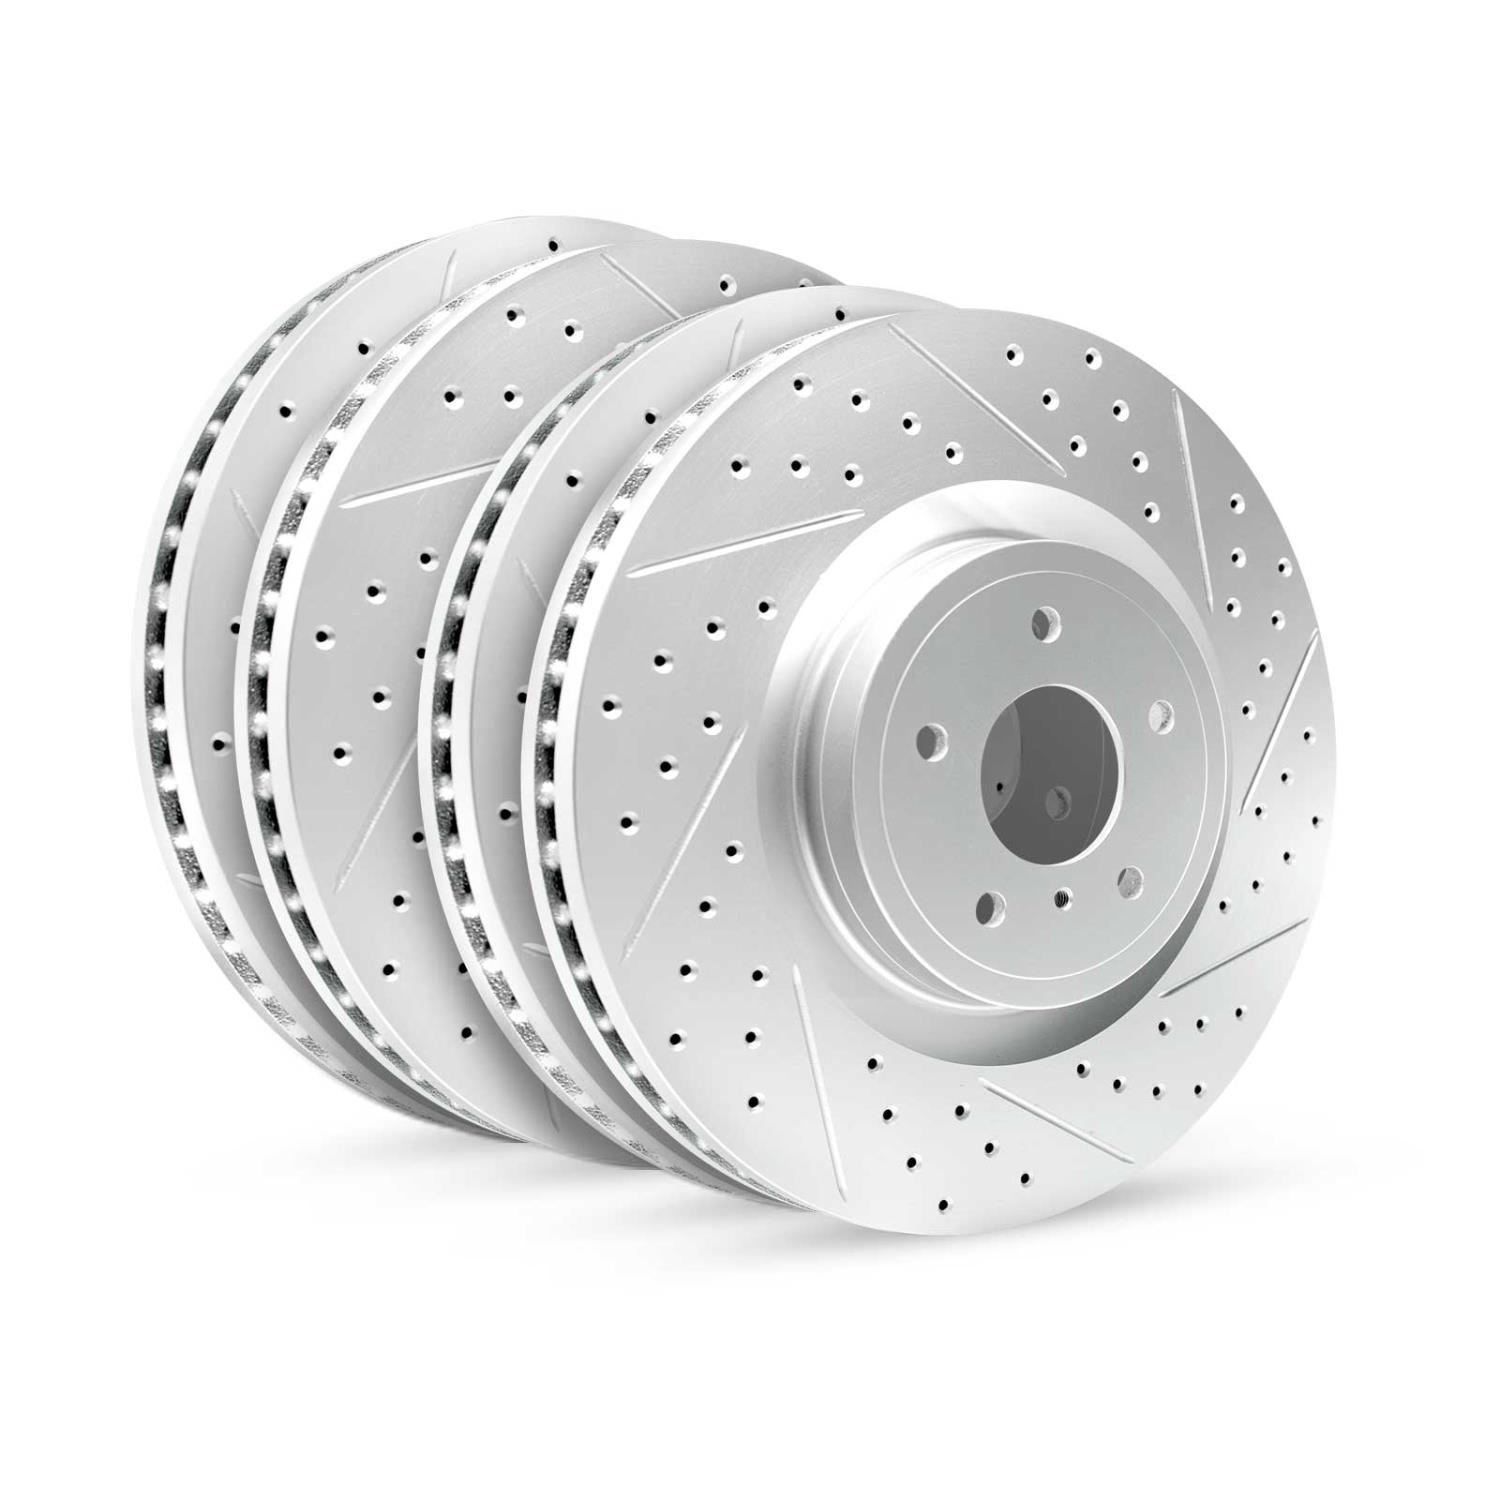 GEO-Carbon Drilled/Slotted Rotors, 2000-2006 BMW, Position: Front/Rear